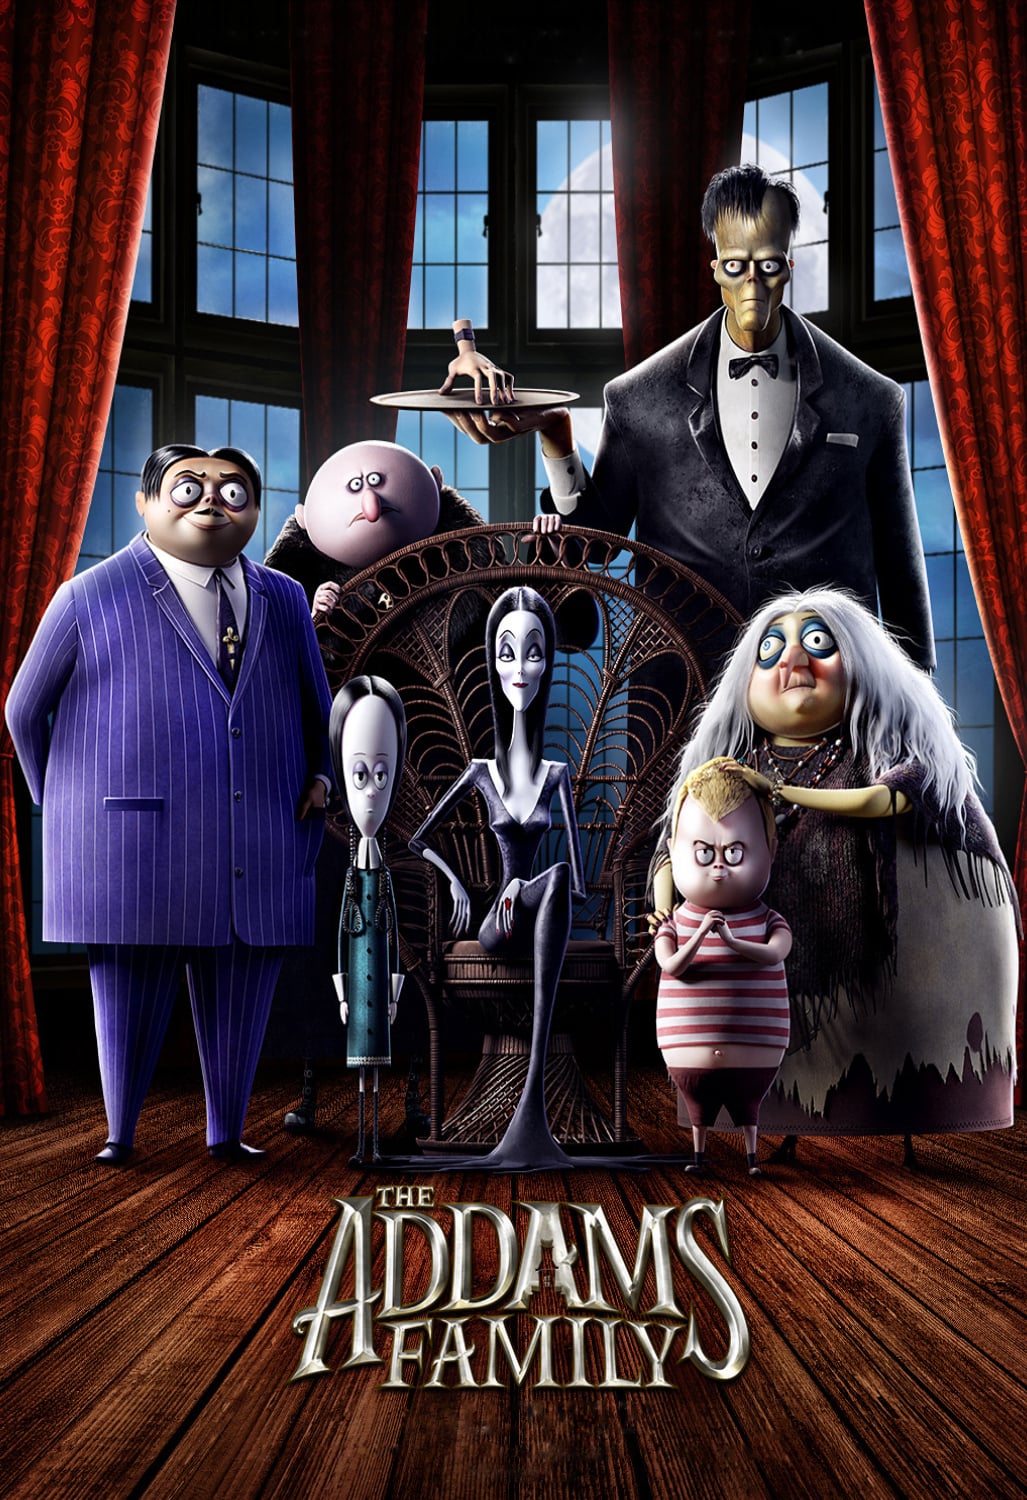 The Addams Family (2019) Official Teaser Trailer